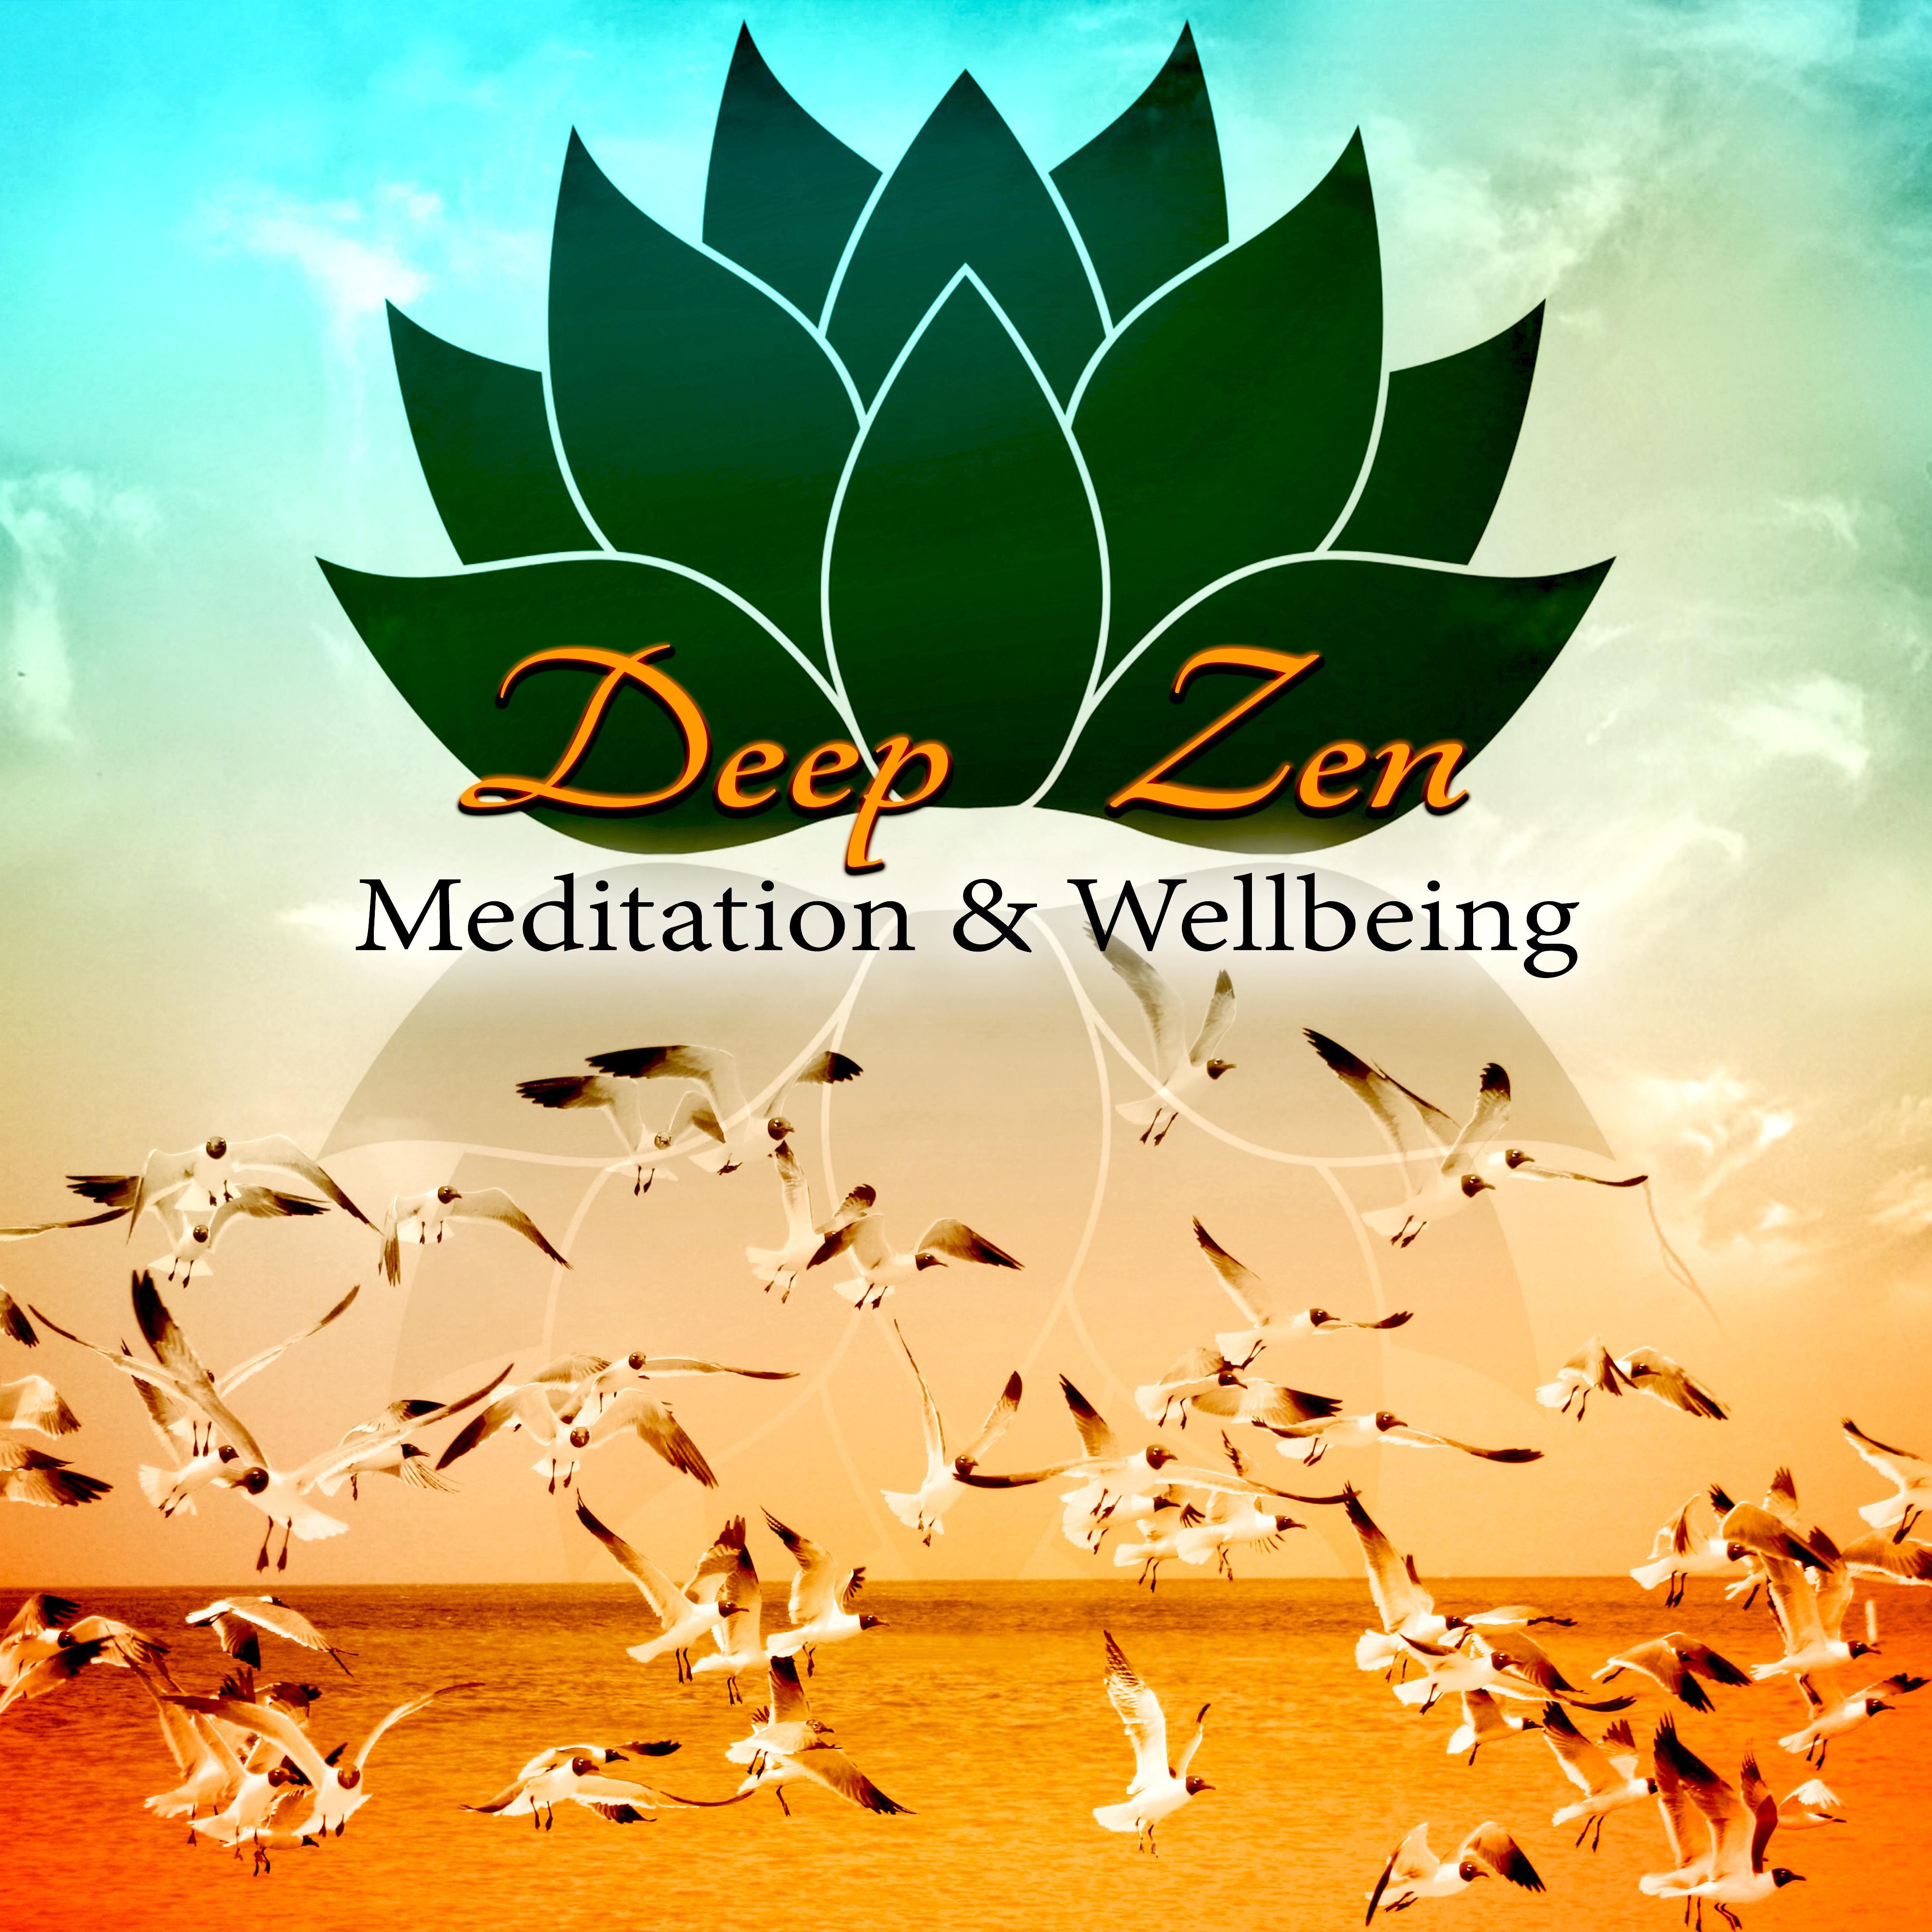 Deep Zen Meditation & Wellbeing - Relaxing Background Music for Massage, Meditation, Yoga, Healing Therapy, Spa, Healthy Life, Good Health, Emotional Health, Piano & Flute Music, White Noise